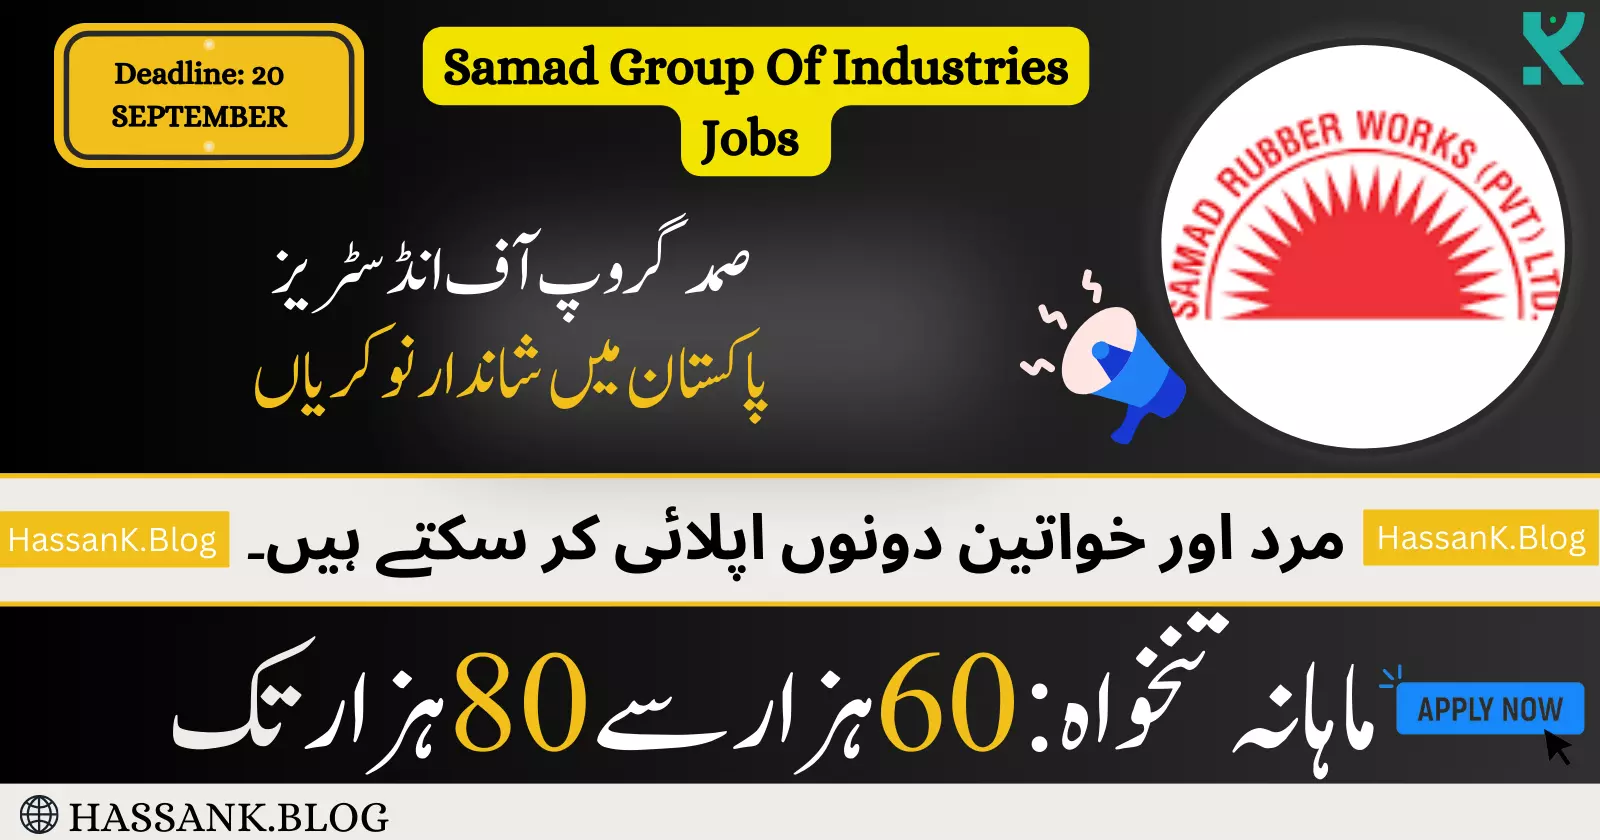 Samad Group Of Industries Jobs Online Apply